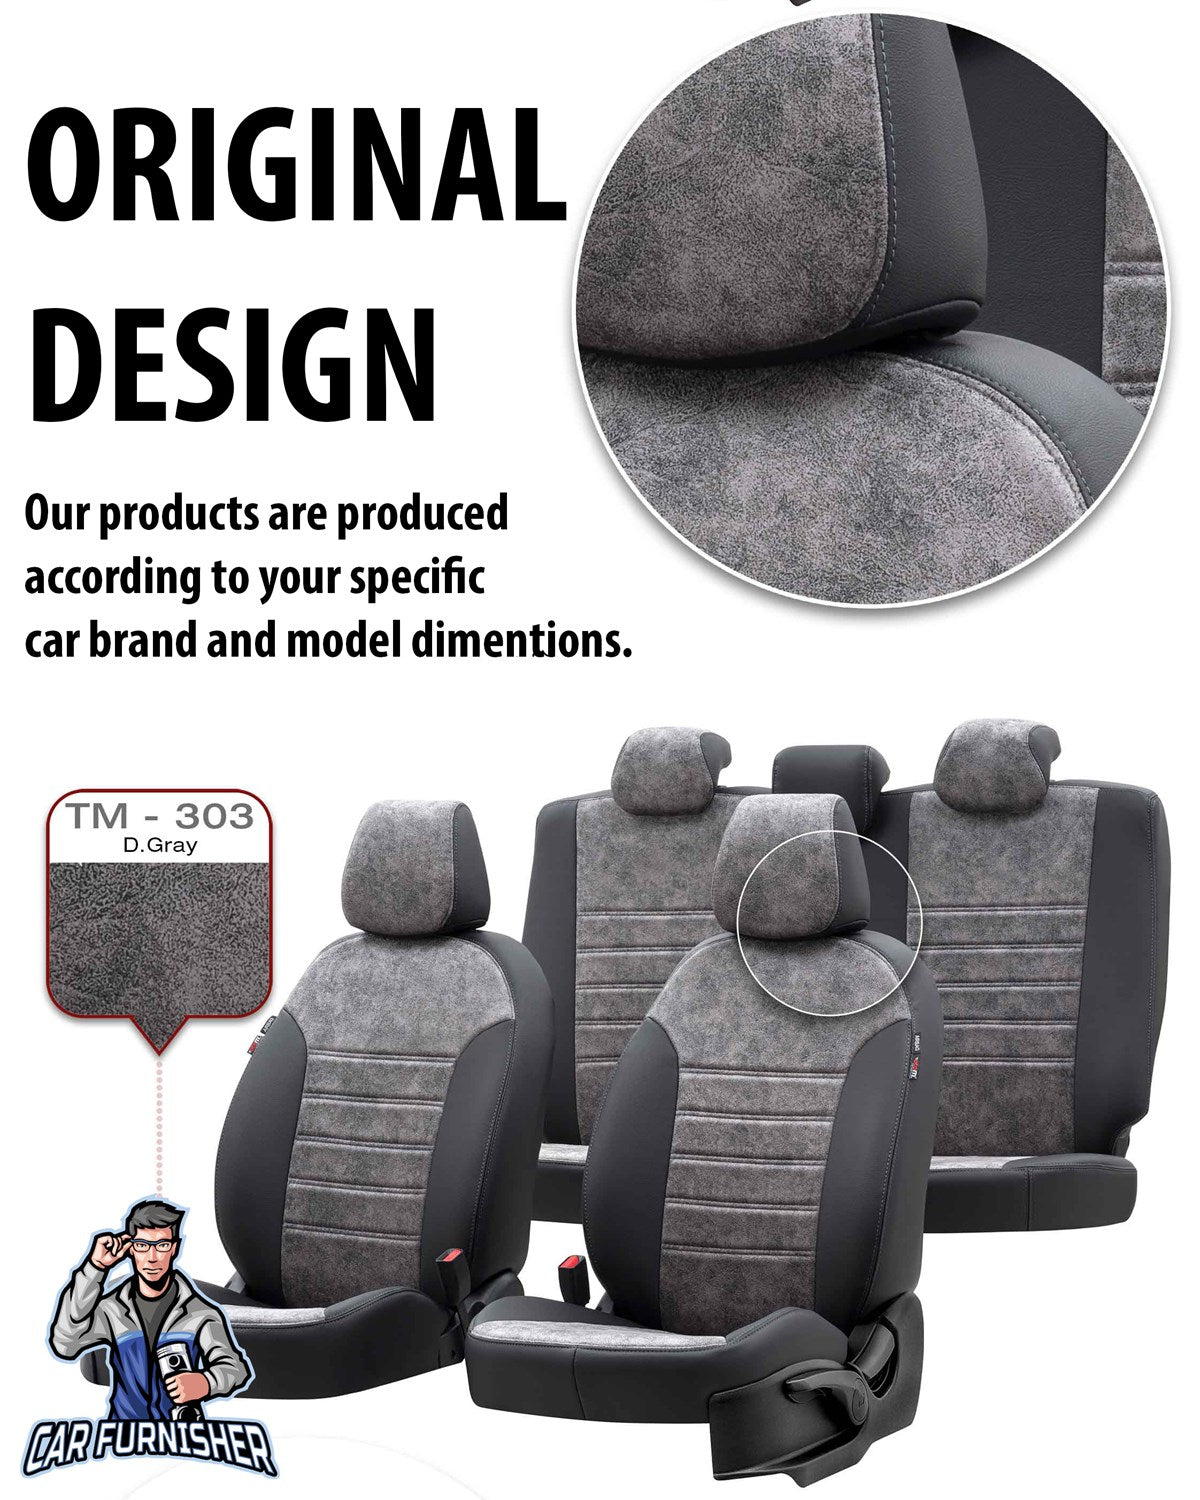 Seat Ateca Seat Covers Milano Suede Design Burgundy Leather & Suede Fabric